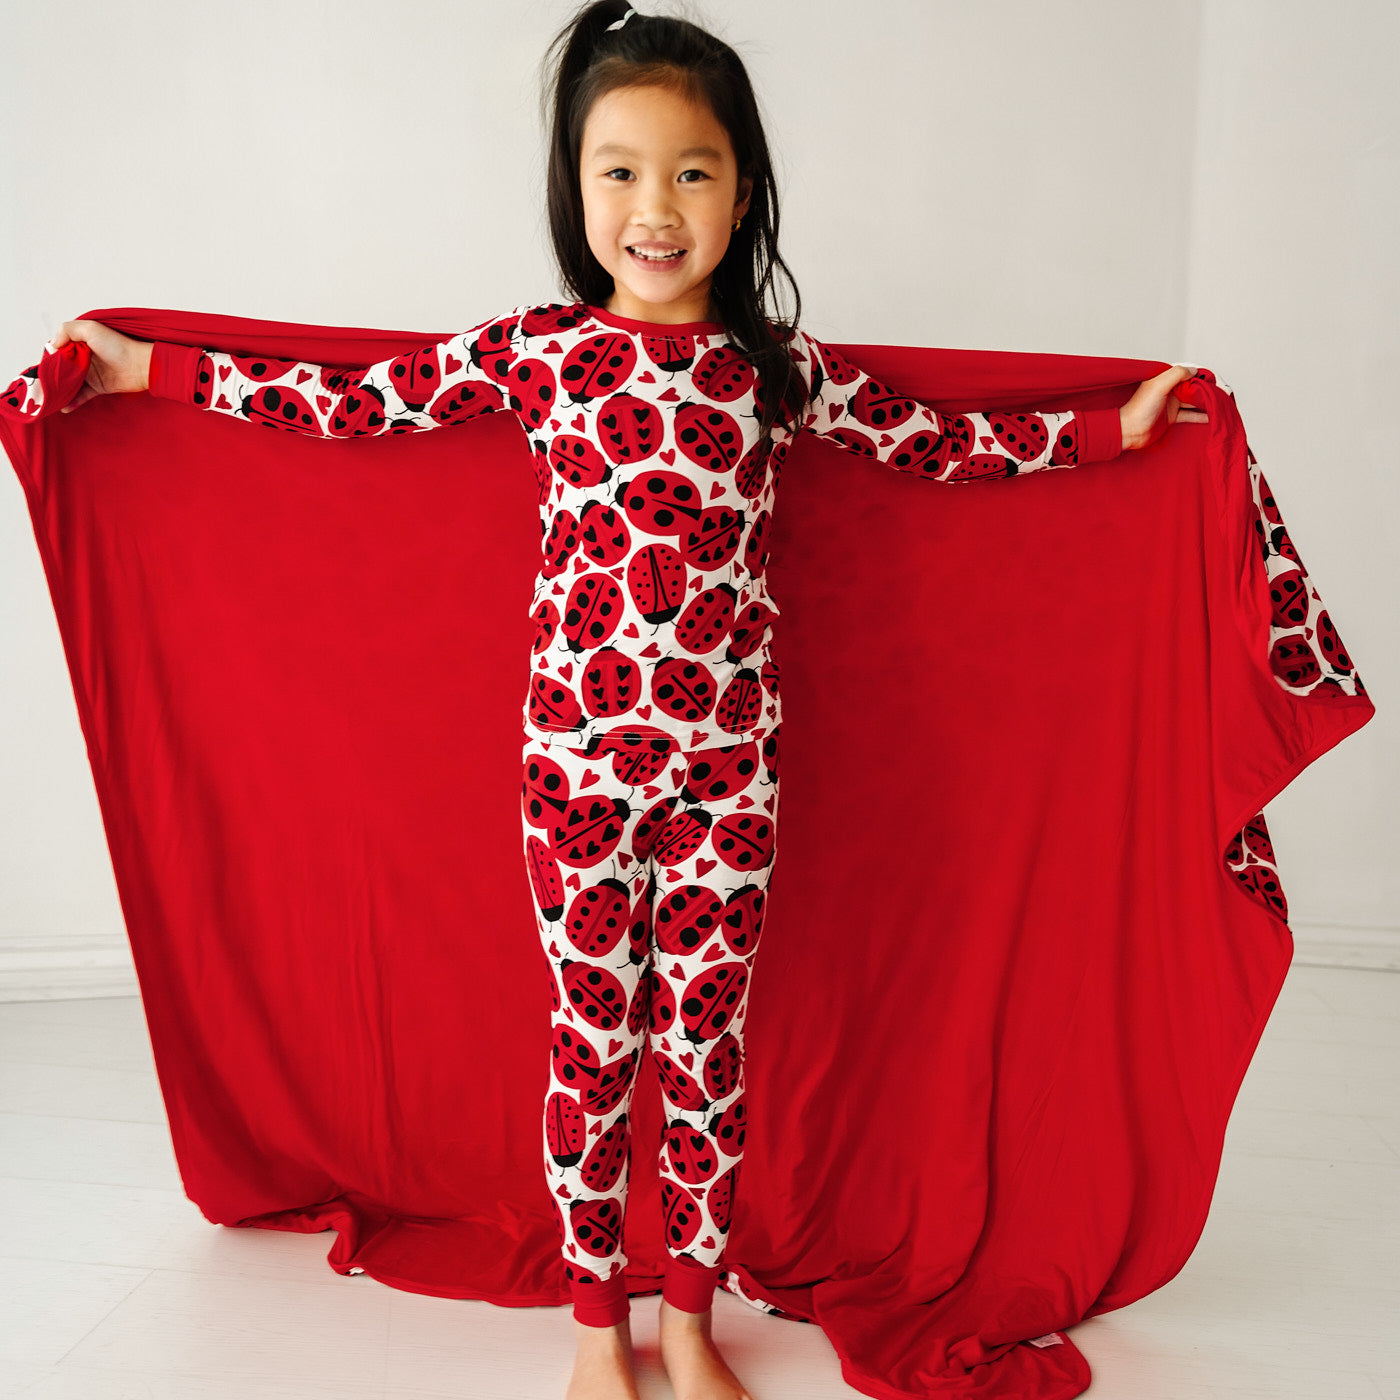 Child holding a Love Bug printed large cloud blanket behind her showing the solid red backing